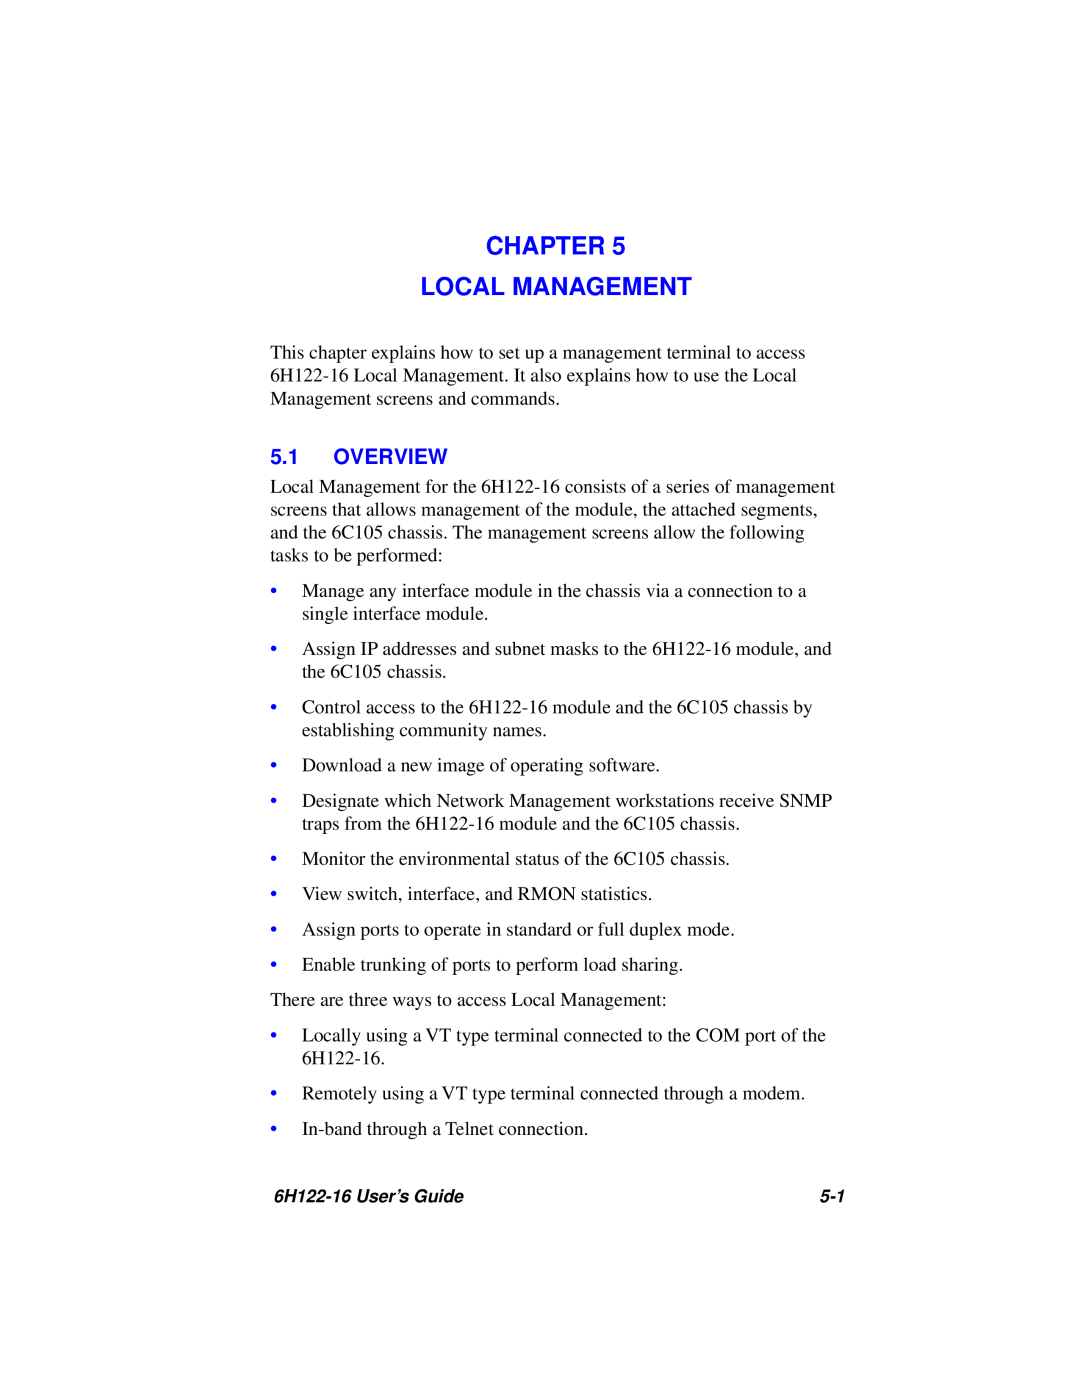 Cabletron Systems 6H122-16 manual Chapter Local Management, Overview 